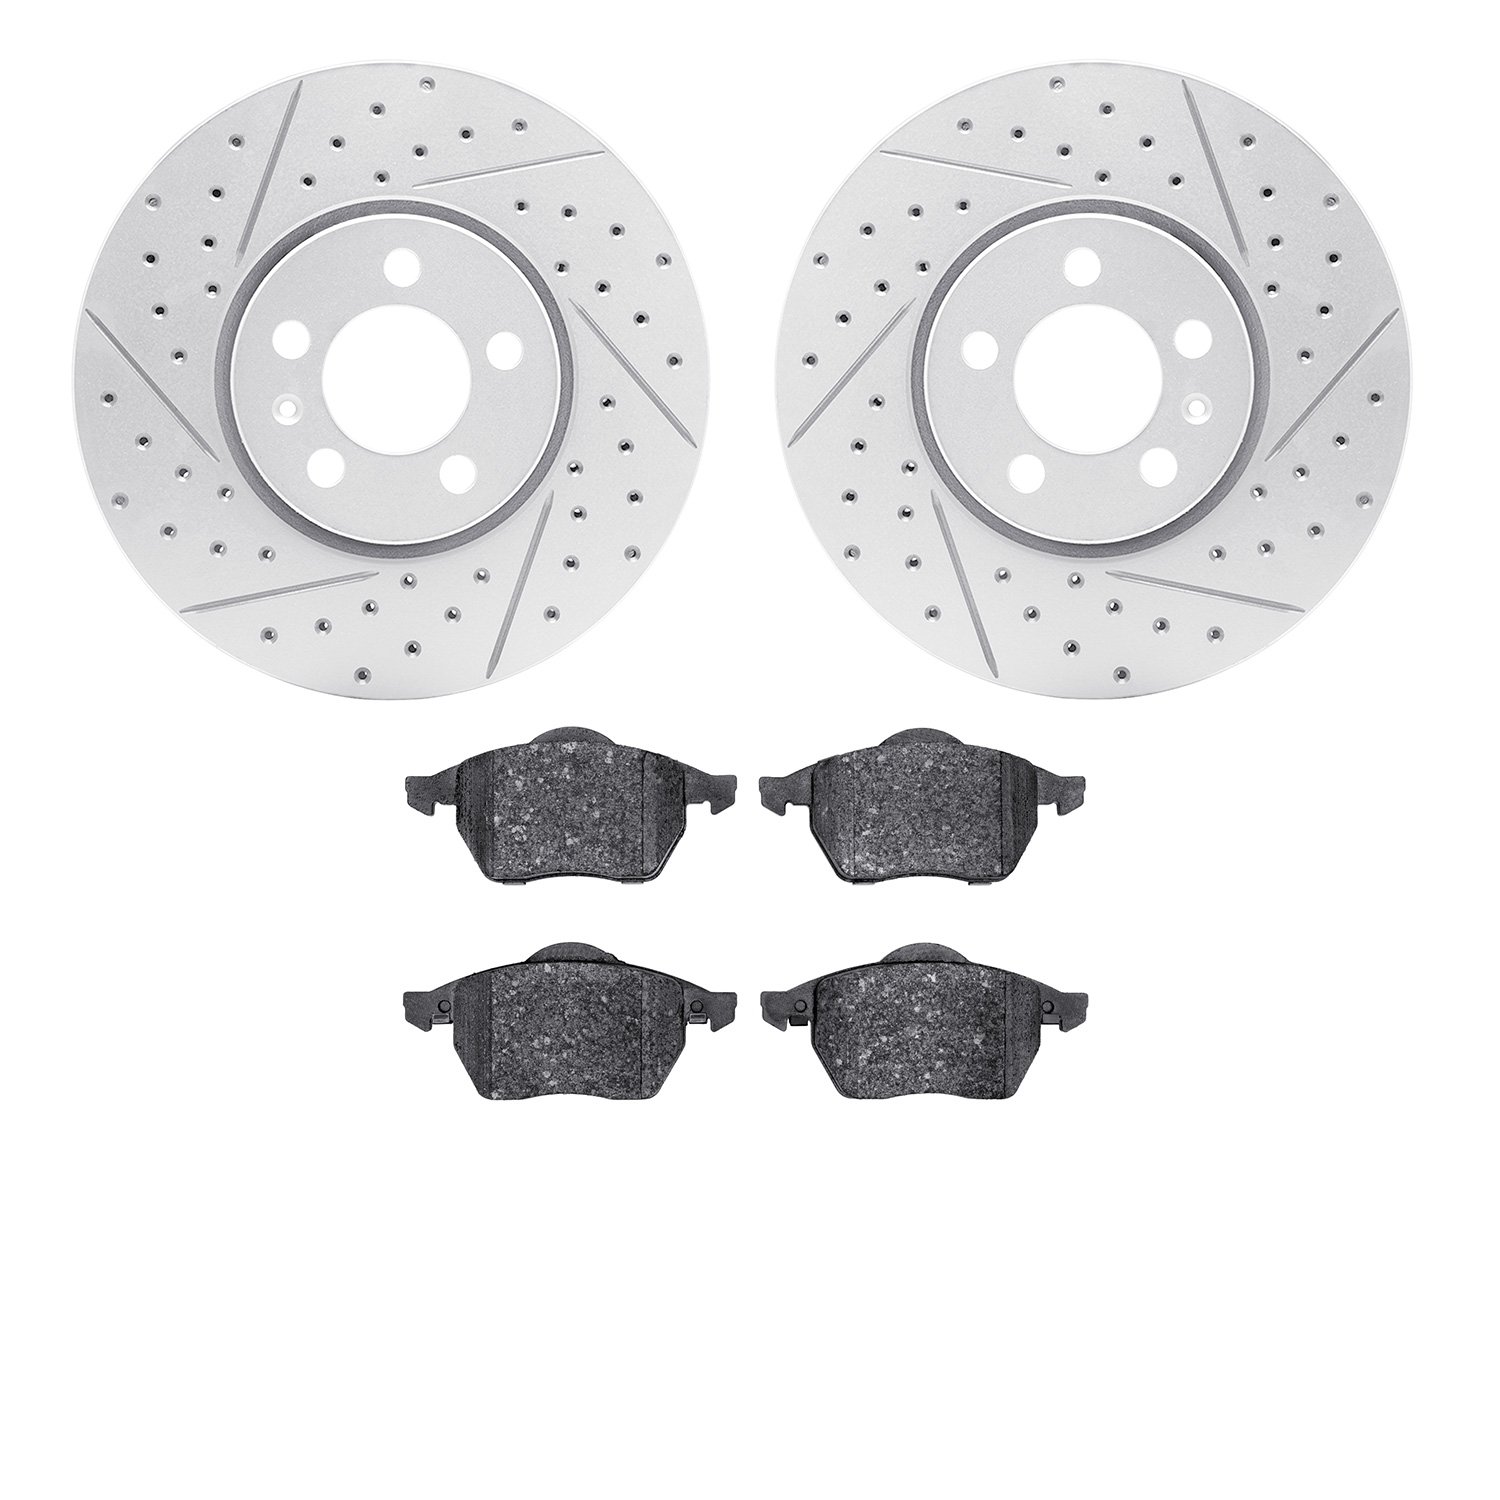 2502-74019 Geoperformance Drilled/Slotted Rotors w/5000 Advanced Brake Pads Kit, 1999-1999 Audi/Volkswagen, Position: Front